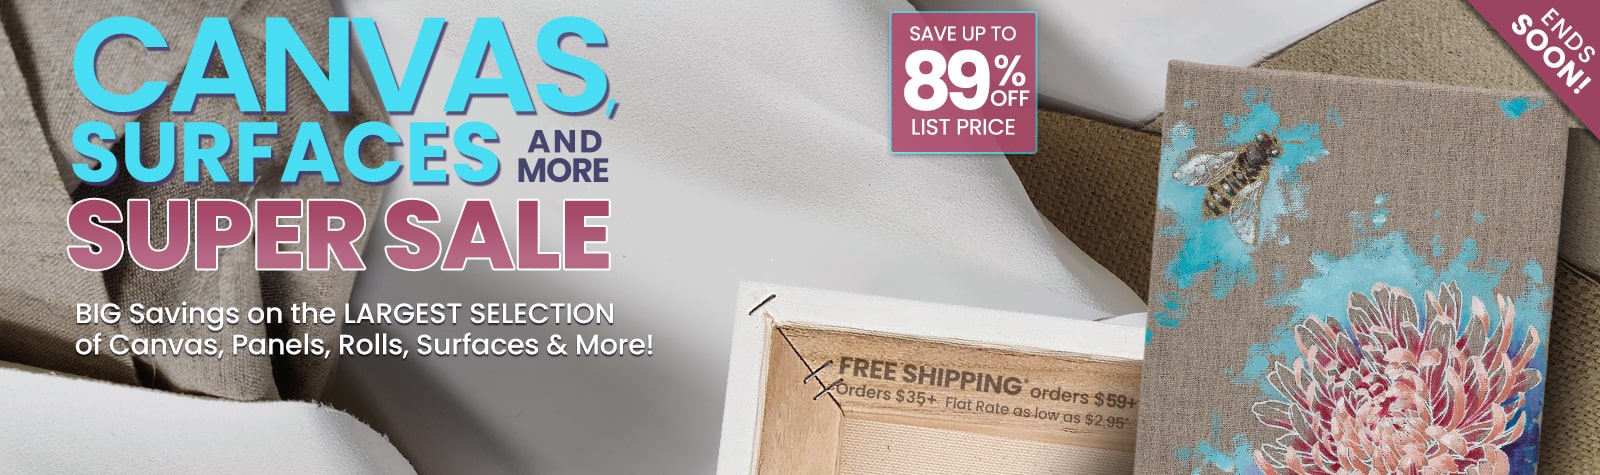 Big Savings on Canvas & Surfaces Super Sale - Up to 89% Off List Price